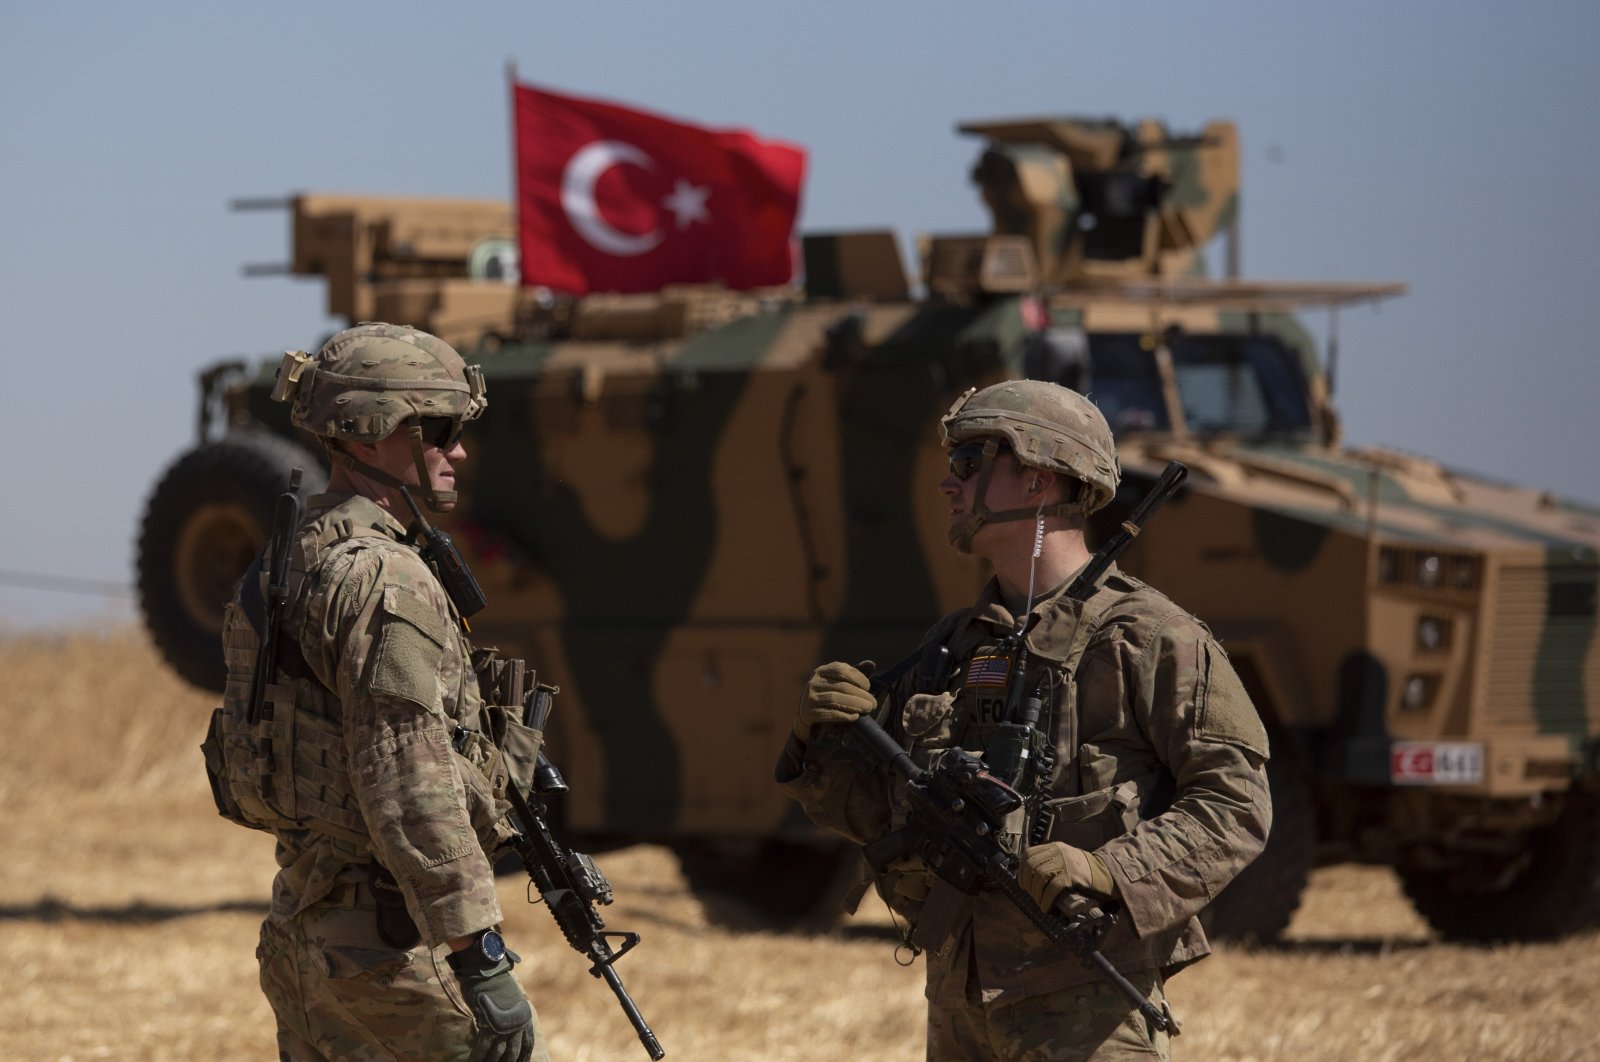 Soldiers stand near a Turkish armored vehicle during the first American-Turkish joint patrol in the so-called safe zone on the Syrian side of the border with Turkey near Tal Abyad, Syria, Sept. 8, 2019. (AP File Photo)